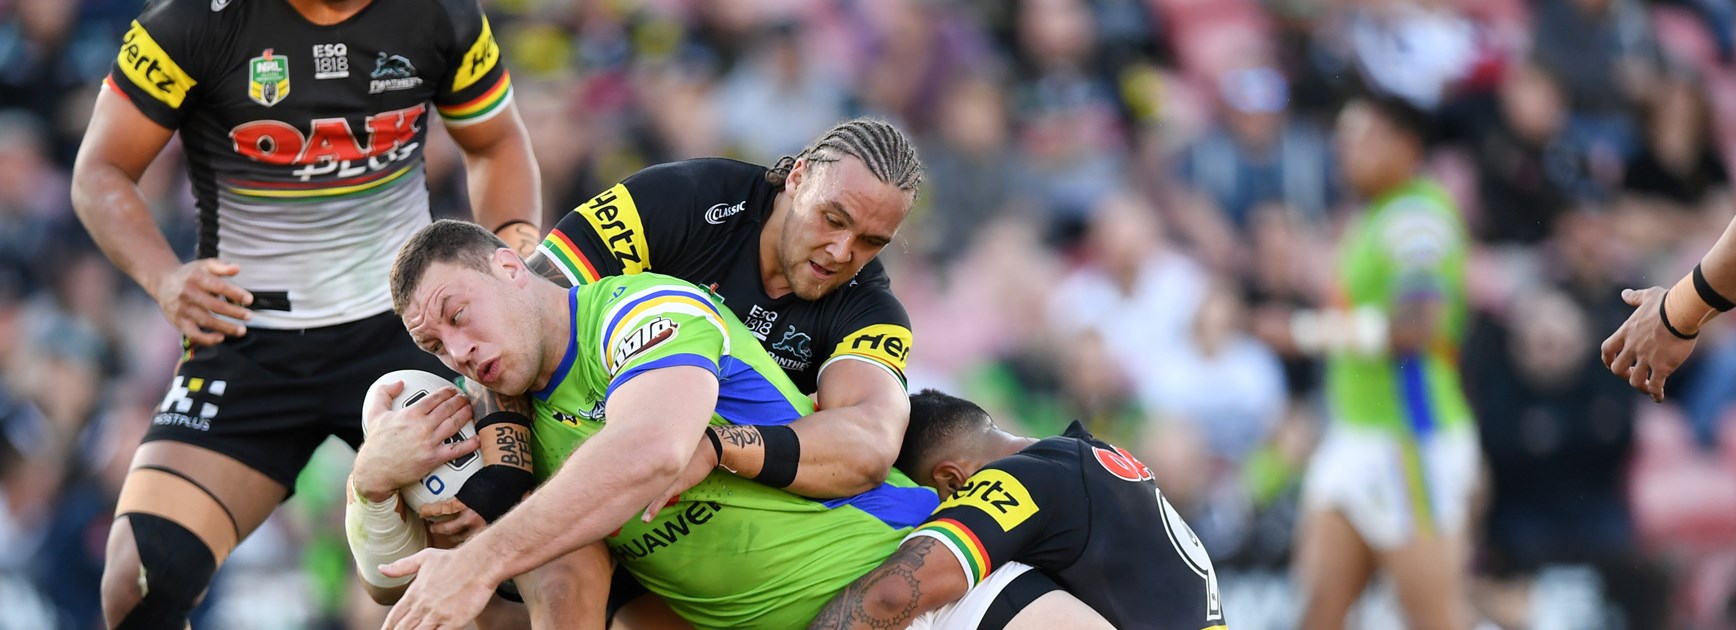 NRL Match Report: Raiders succumb to Panthers in Penrith